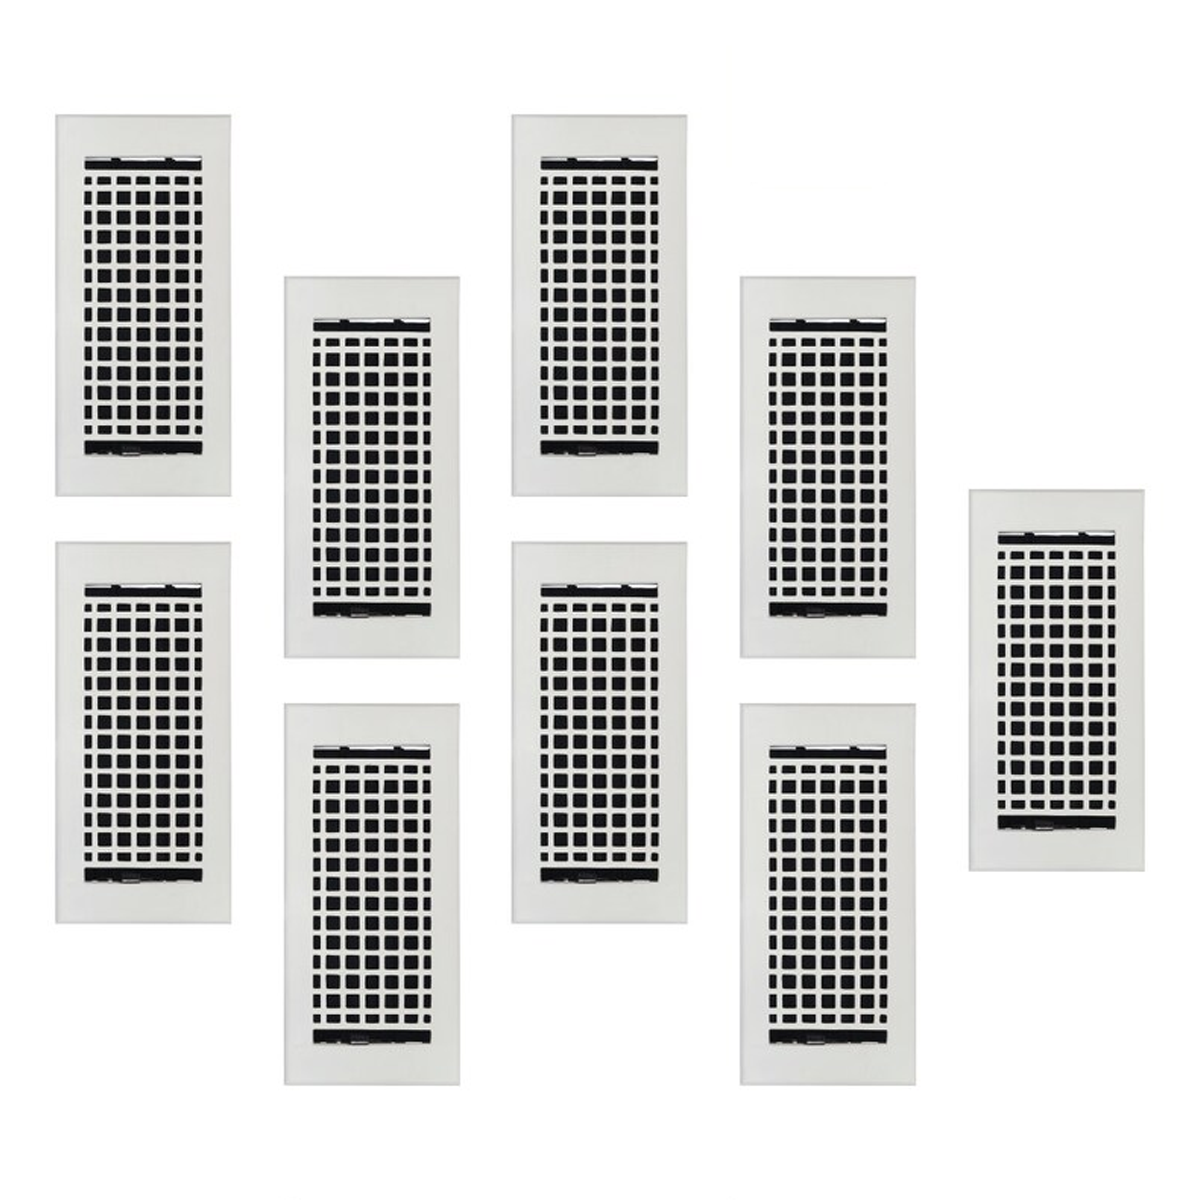 PACK of 9 MOSAIC 4"x10" WALL/CEILING Solid Cast Aluminum Air Supply louvered Powder Coated